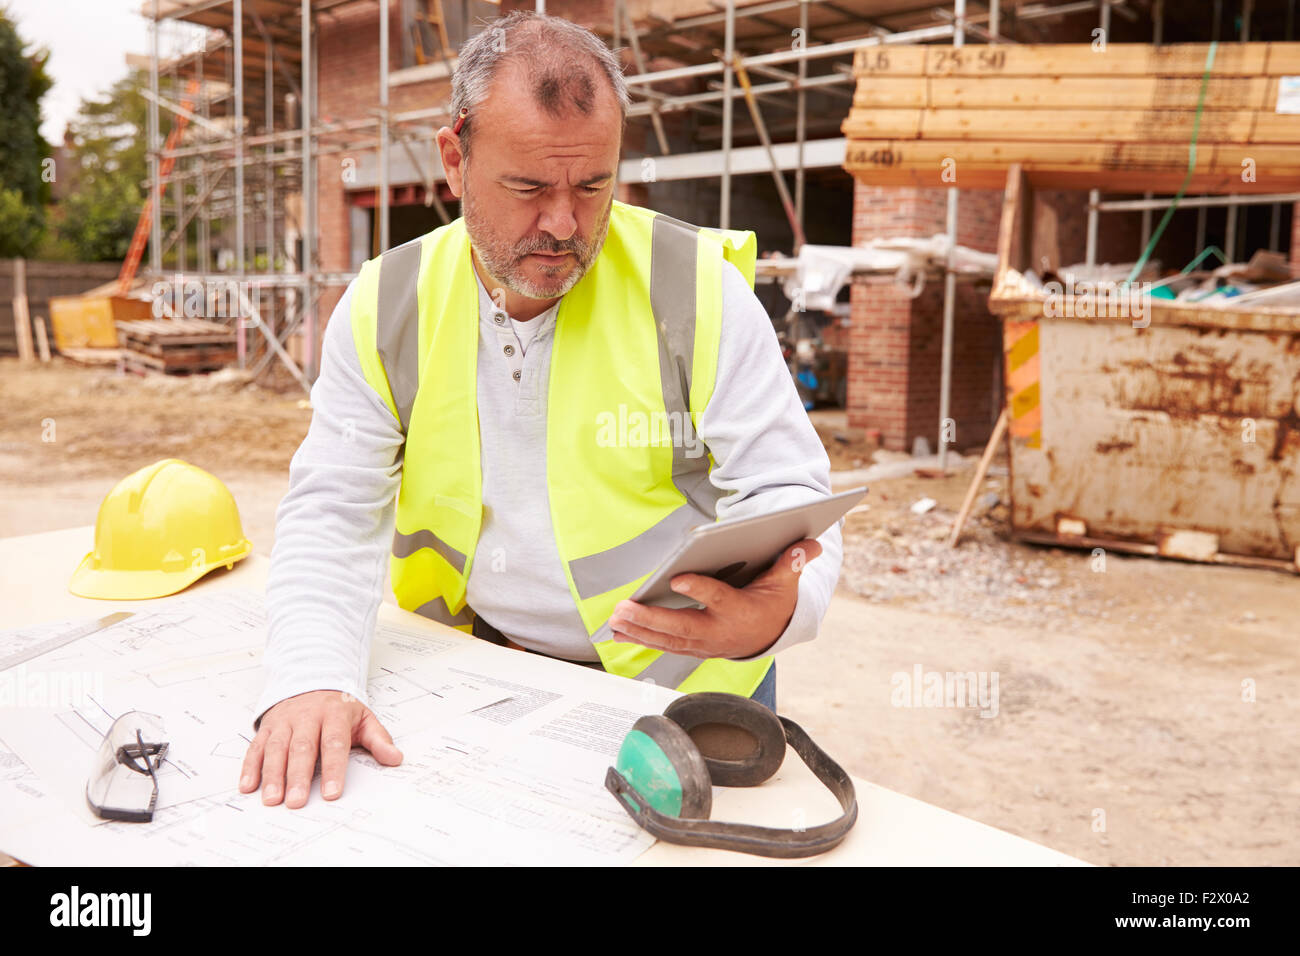 Construction Worker Using Digital Tablet On Building Site Stock Photo